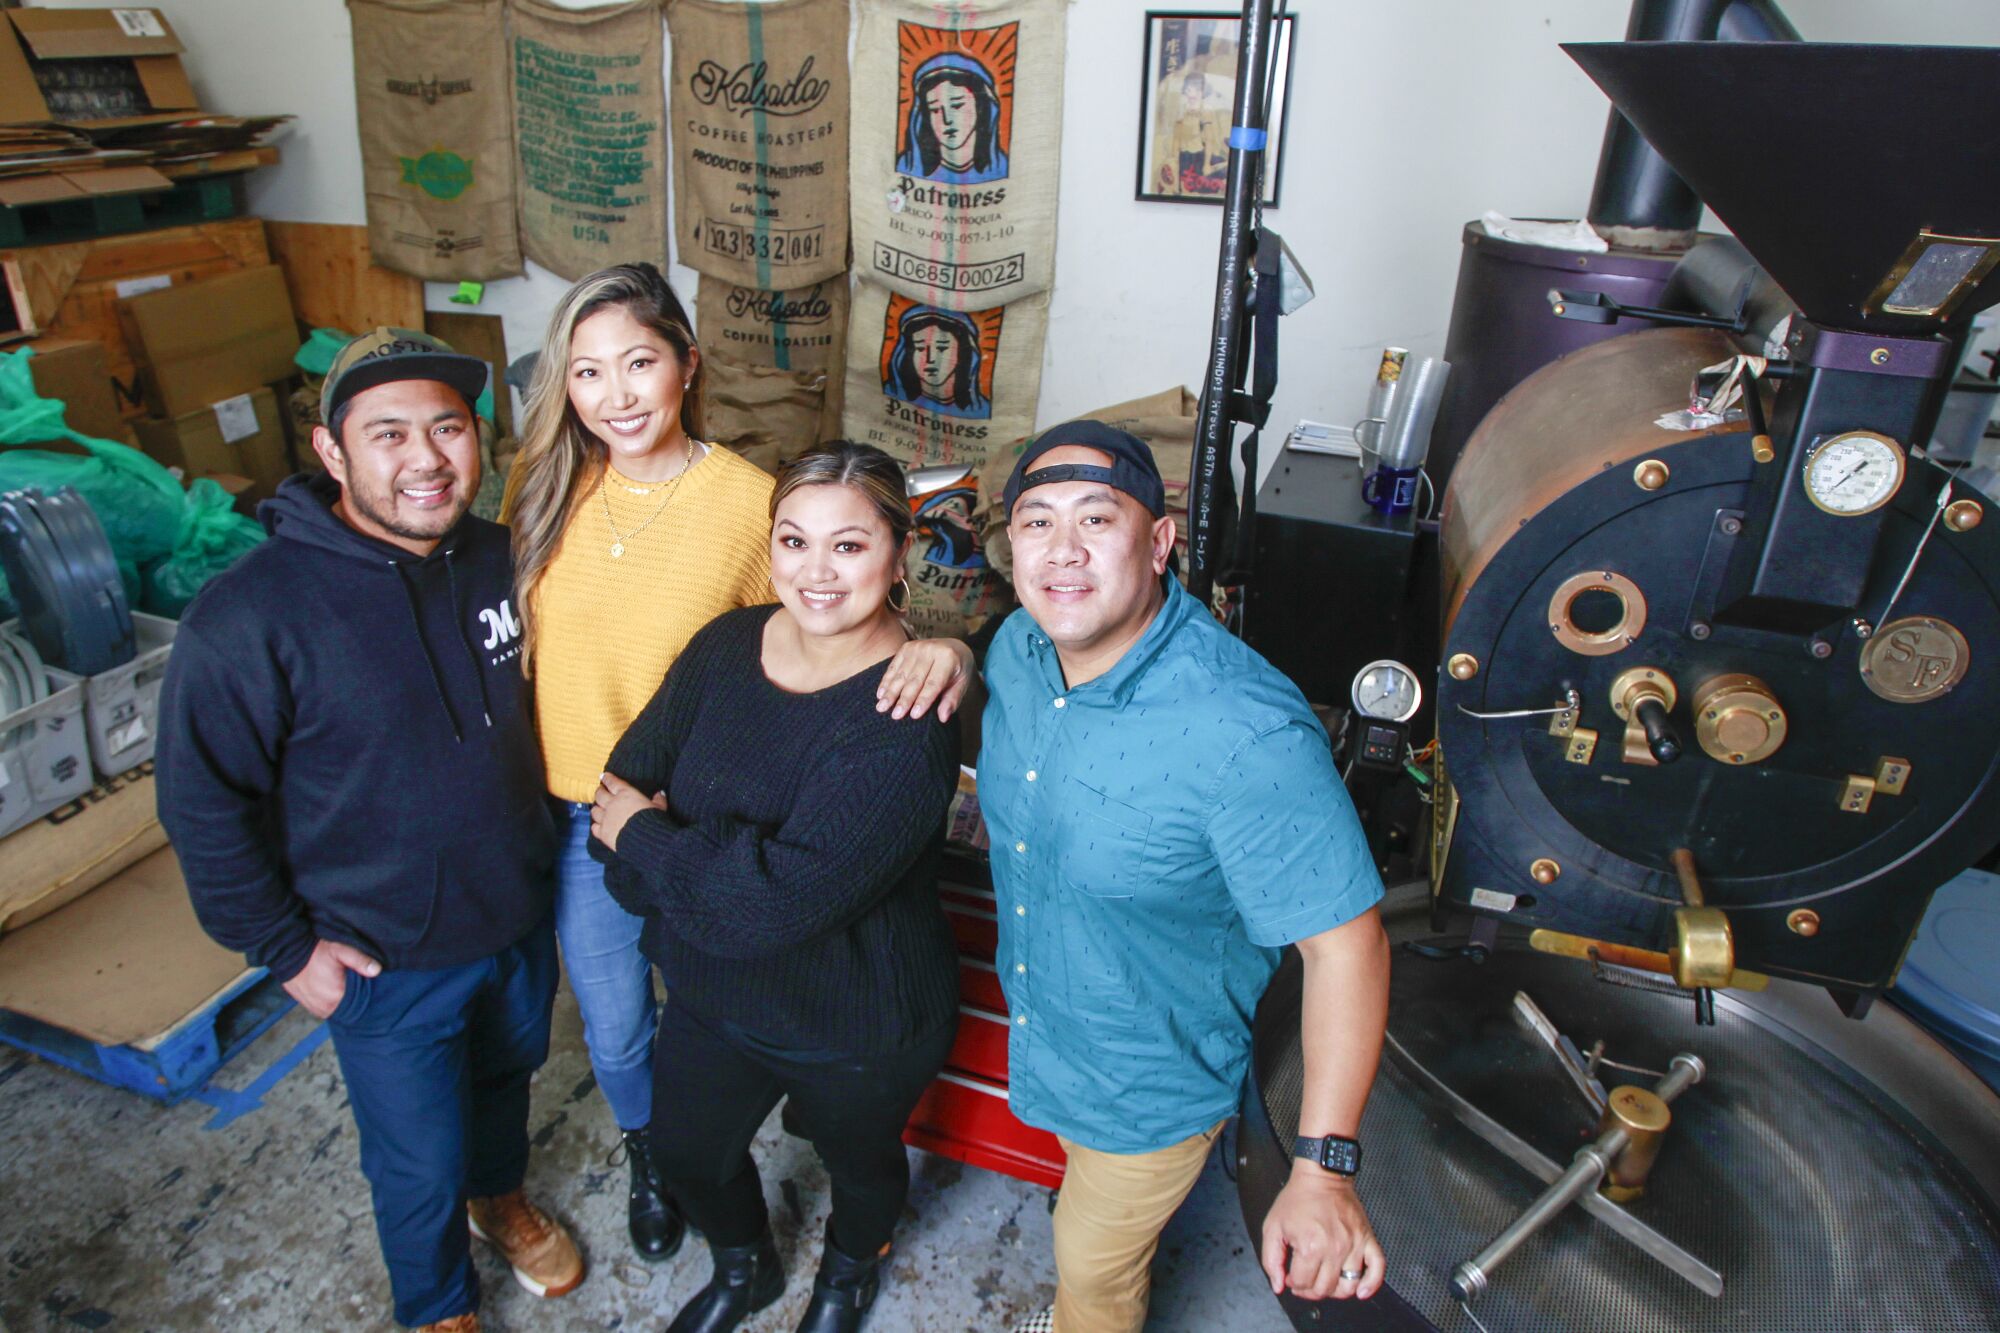 Mostra founders (from left) Sam Magtanong, Jelynn Malone, Beverly Magtanong and Mike Arquines in the company's Carmel Mountain Ranch roasting facility.